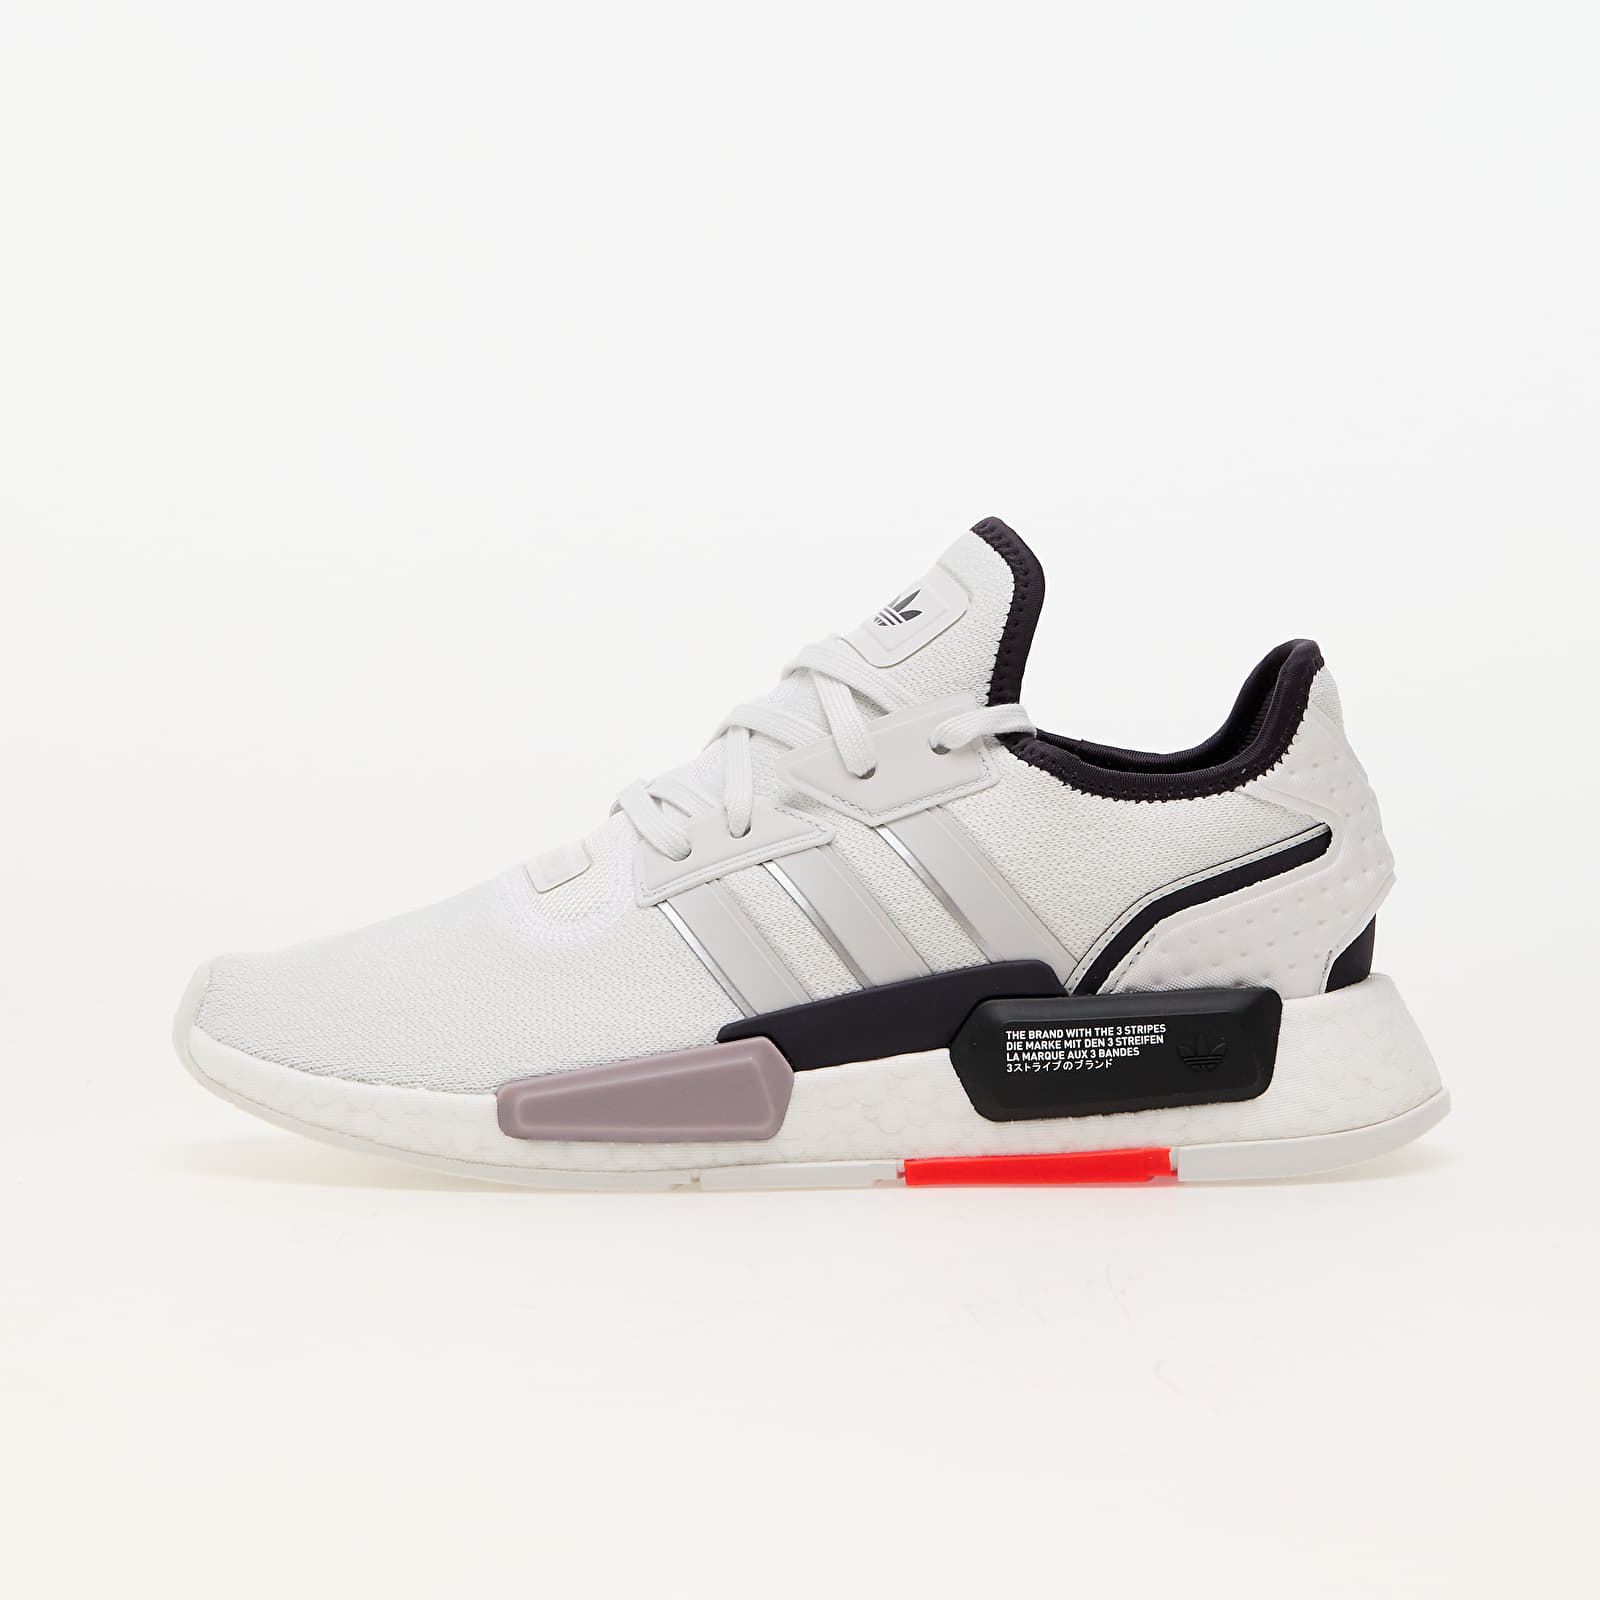 Baskets et chaussures pour hommes adidas Nmd_G1 Crystal White/ Grey One/ Solid Red